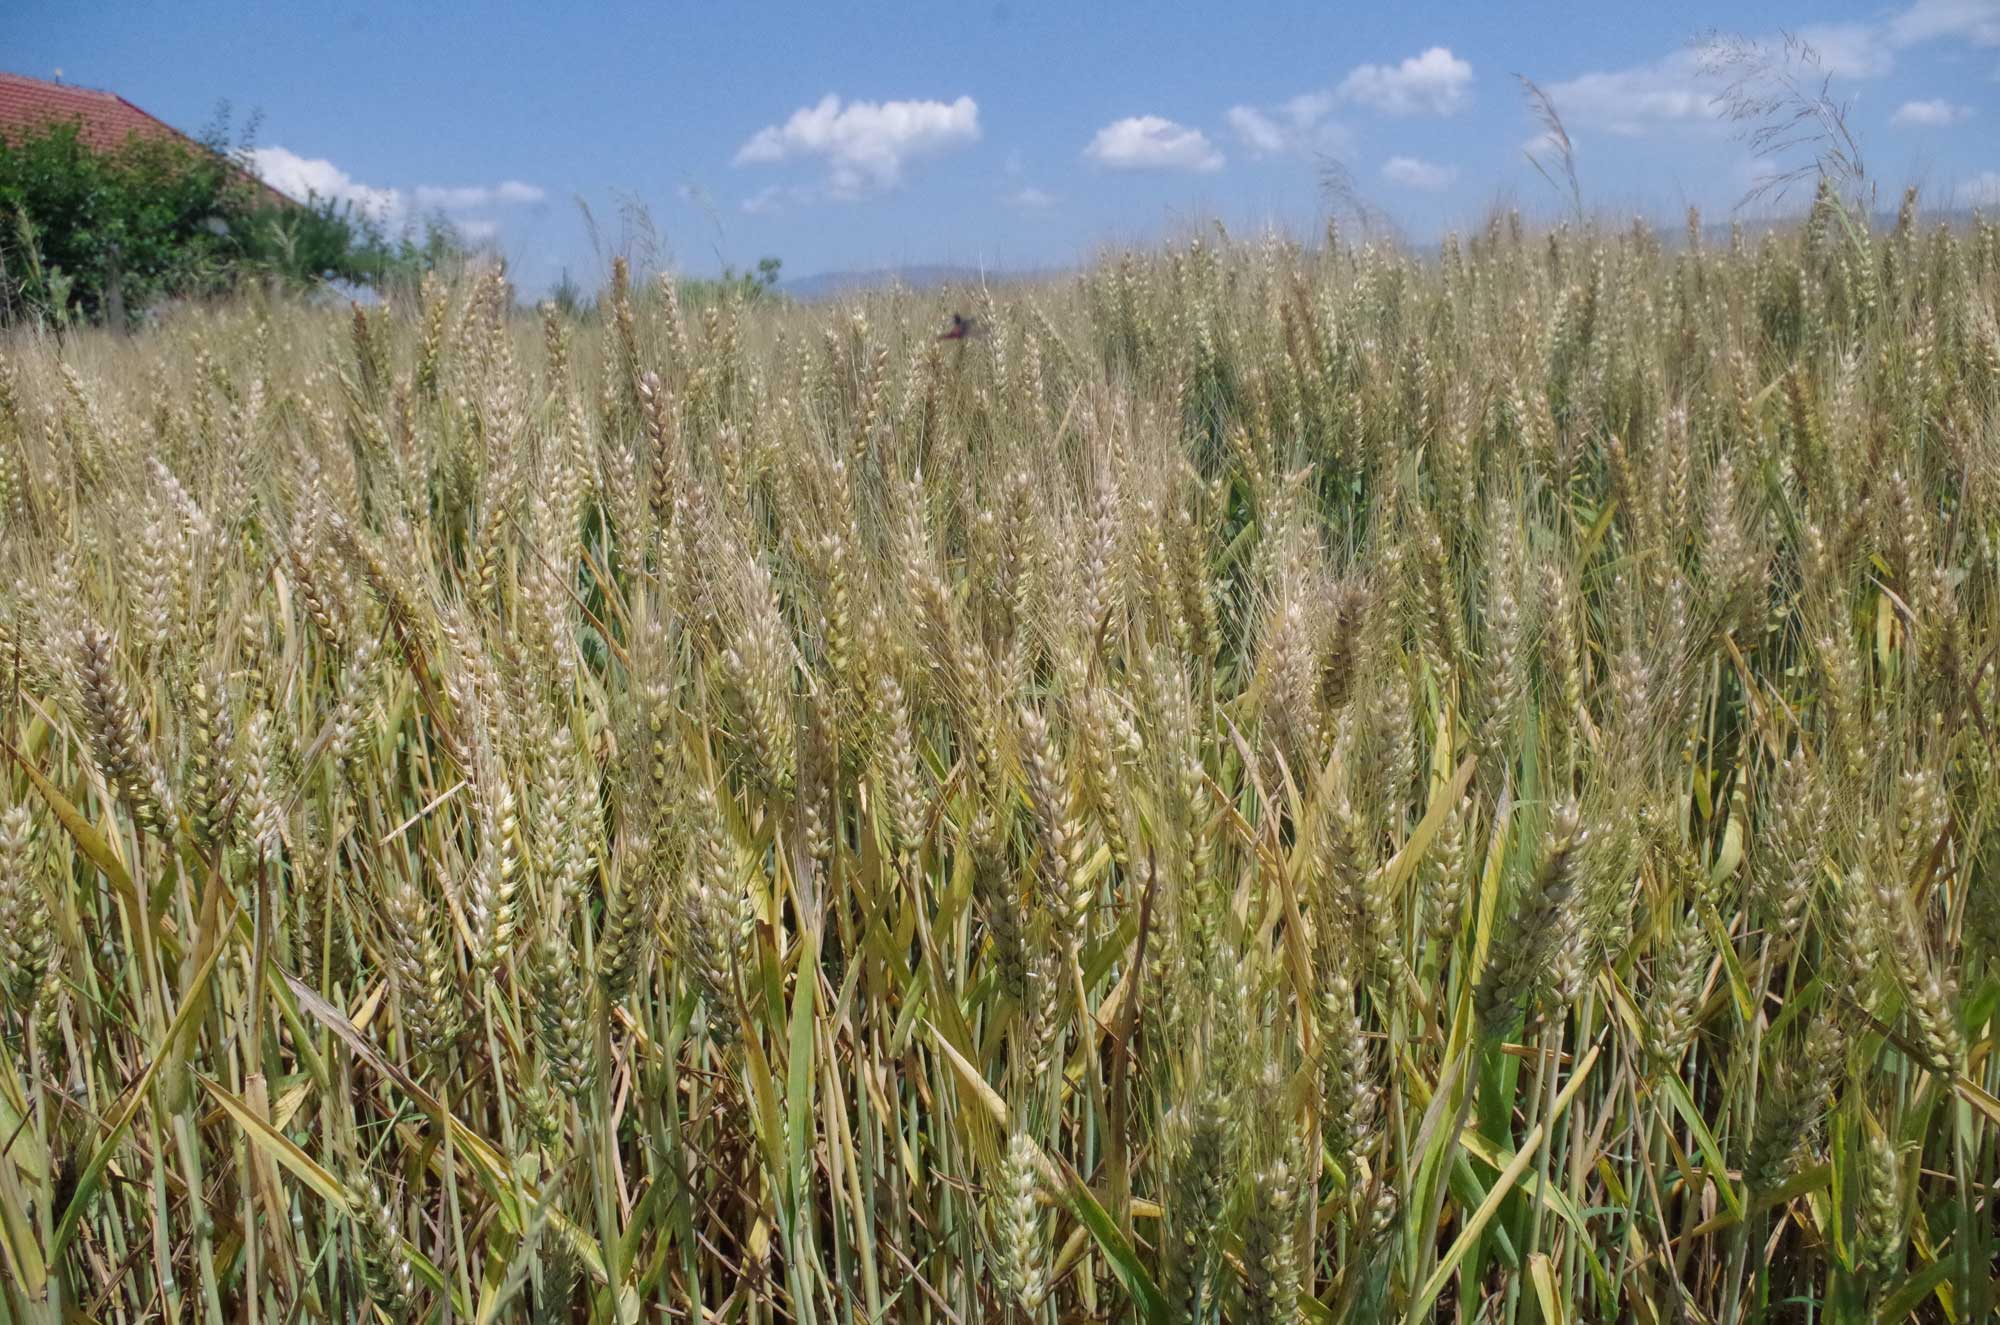 Photograph of a field of triticale. The photo shows a field of triticale plants with nearly mature ears.